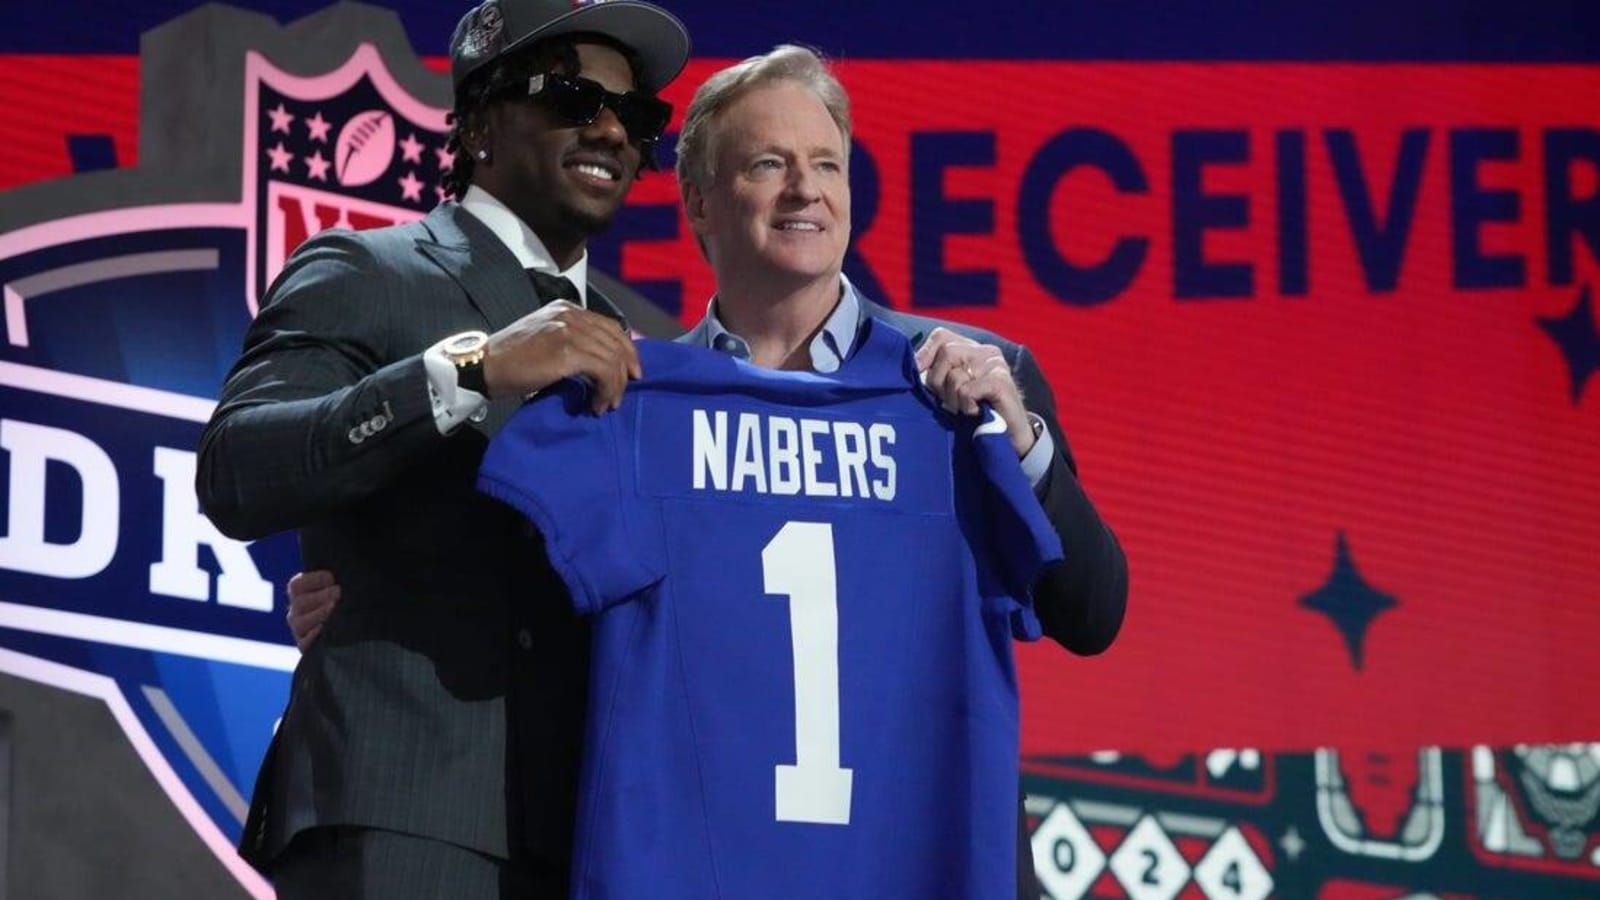 Giants sign first-round pick Malik Nabers to reported $29.2M deal